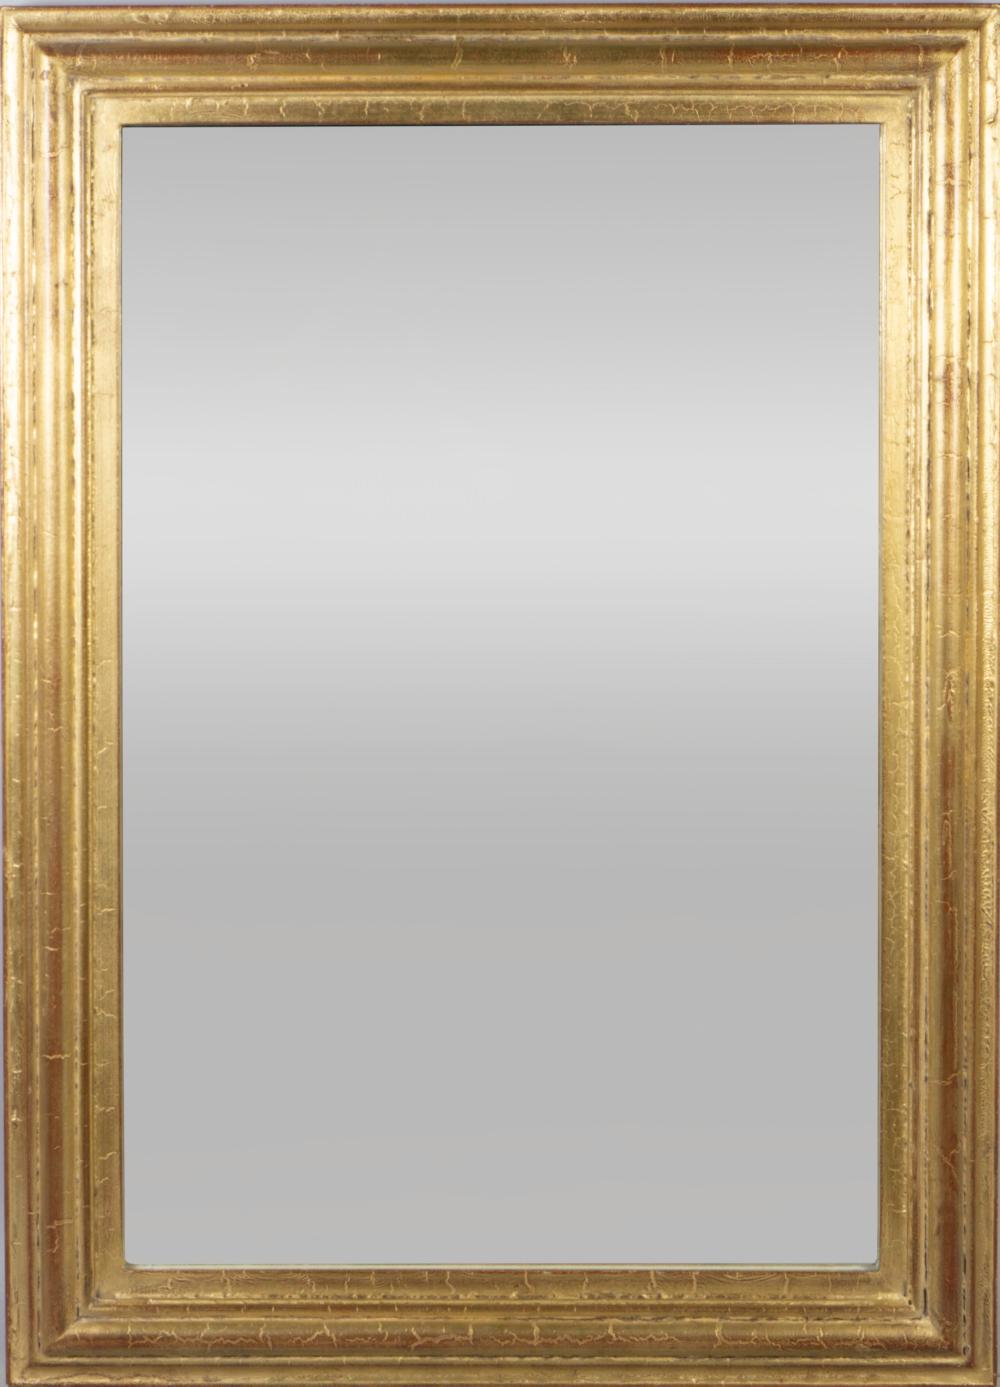 CLASSICAL STYLE GOLD PAINTED MIRROR